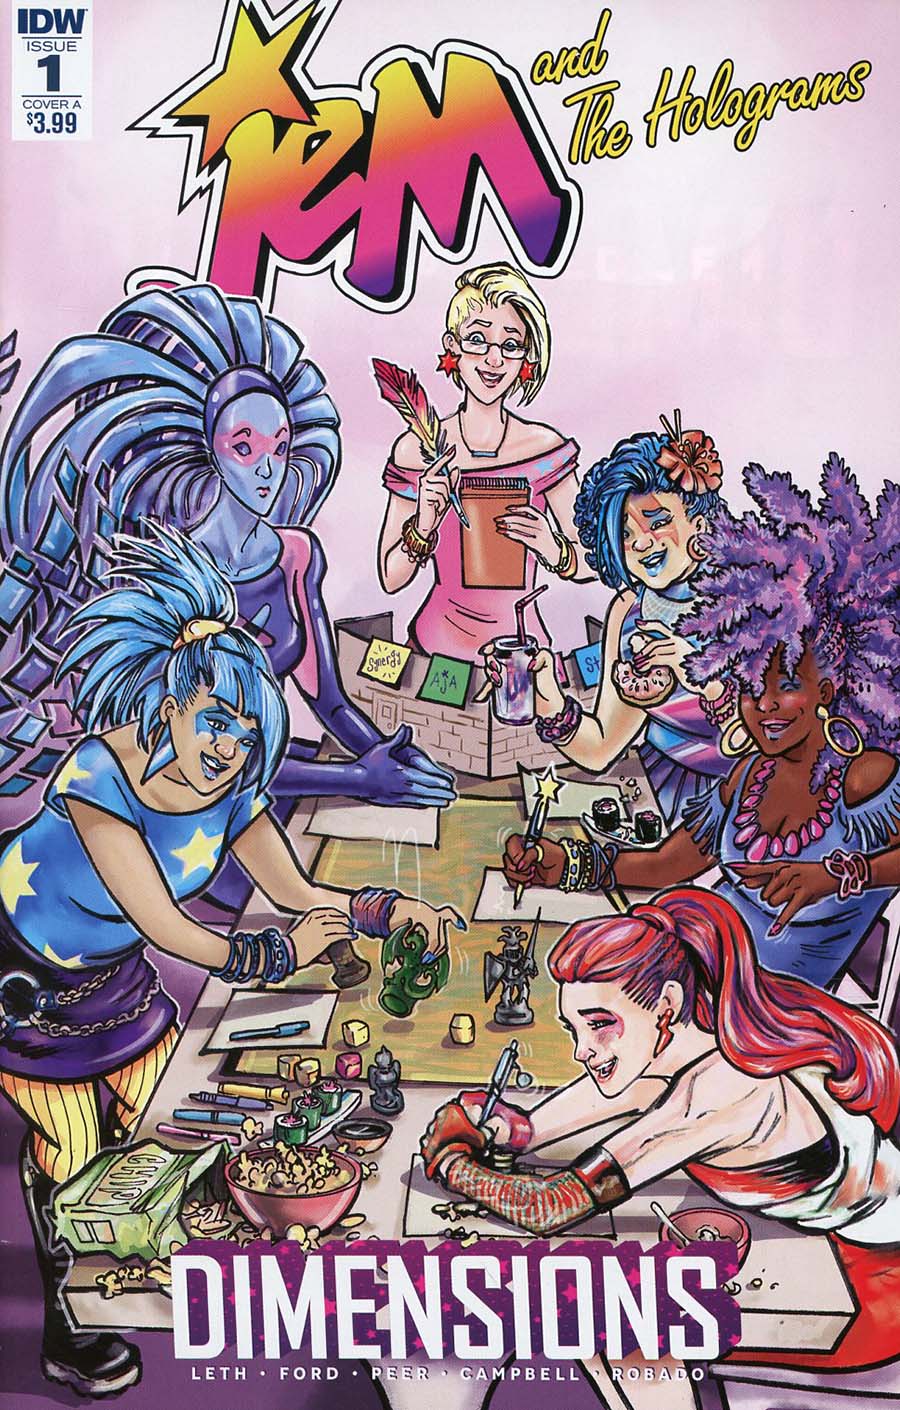 Jem And The Holograms Dimensions #1 Cover A Regular Tana Ford Cover